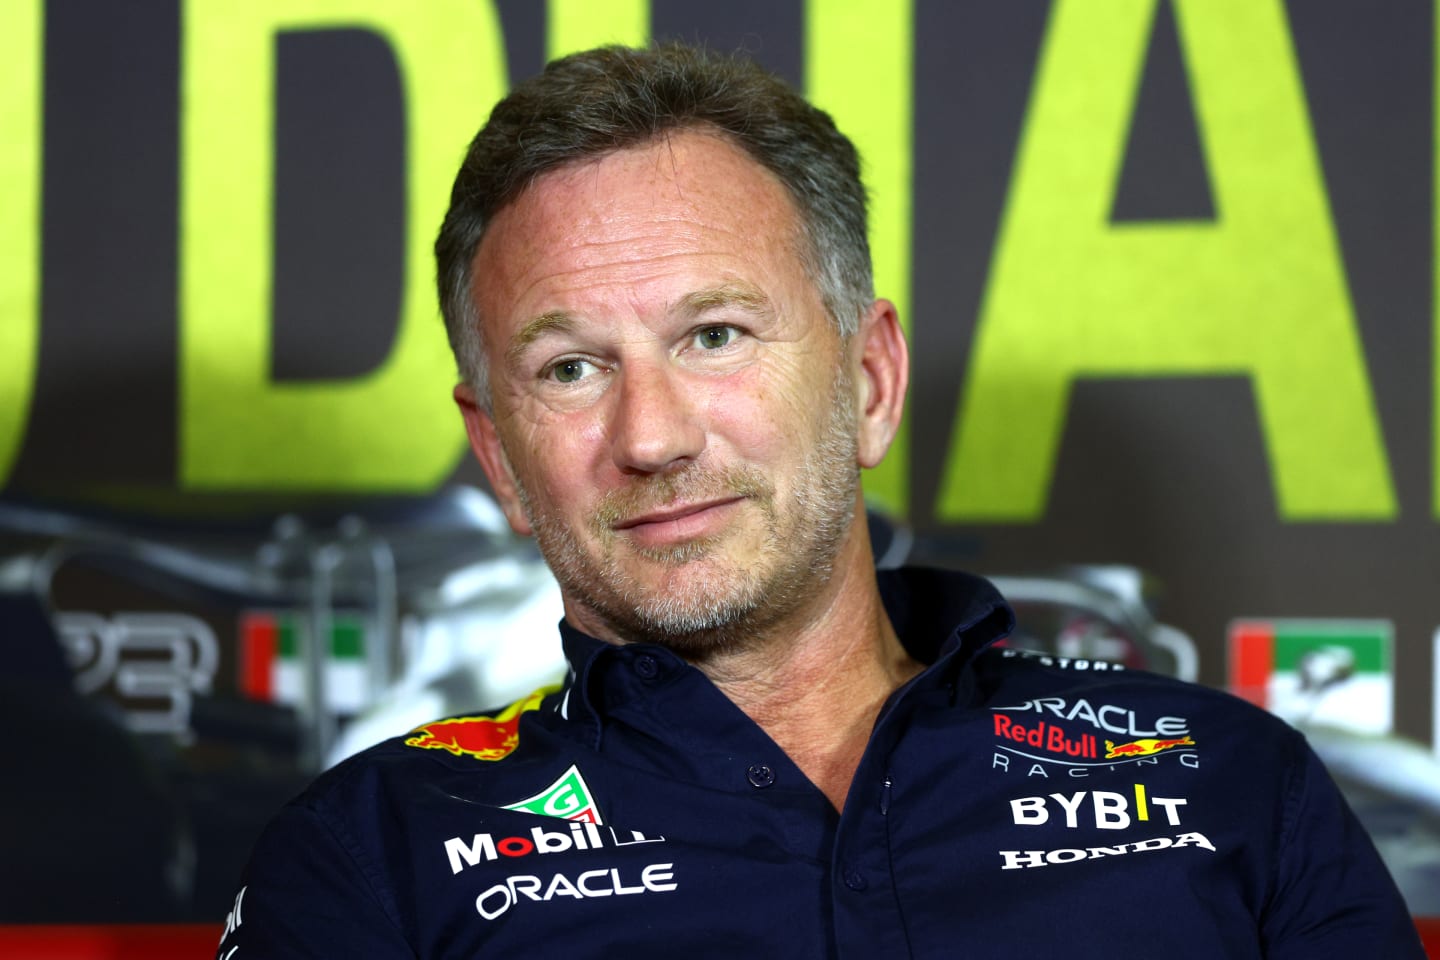 ABU DHABI, UNITED ARAB EMIRATES - NOVEMBER 24: Red Bull Racing Team Principal Christian Horner attends the Drivers Press Conference during practice ahead of the F1 Grand Prix of Abu Dhabi at Yas Marina Circuit on November 24, 2023 in Abu Dhabi, United Arab Emirates. (Photo by Clive Rose/Getty Images)